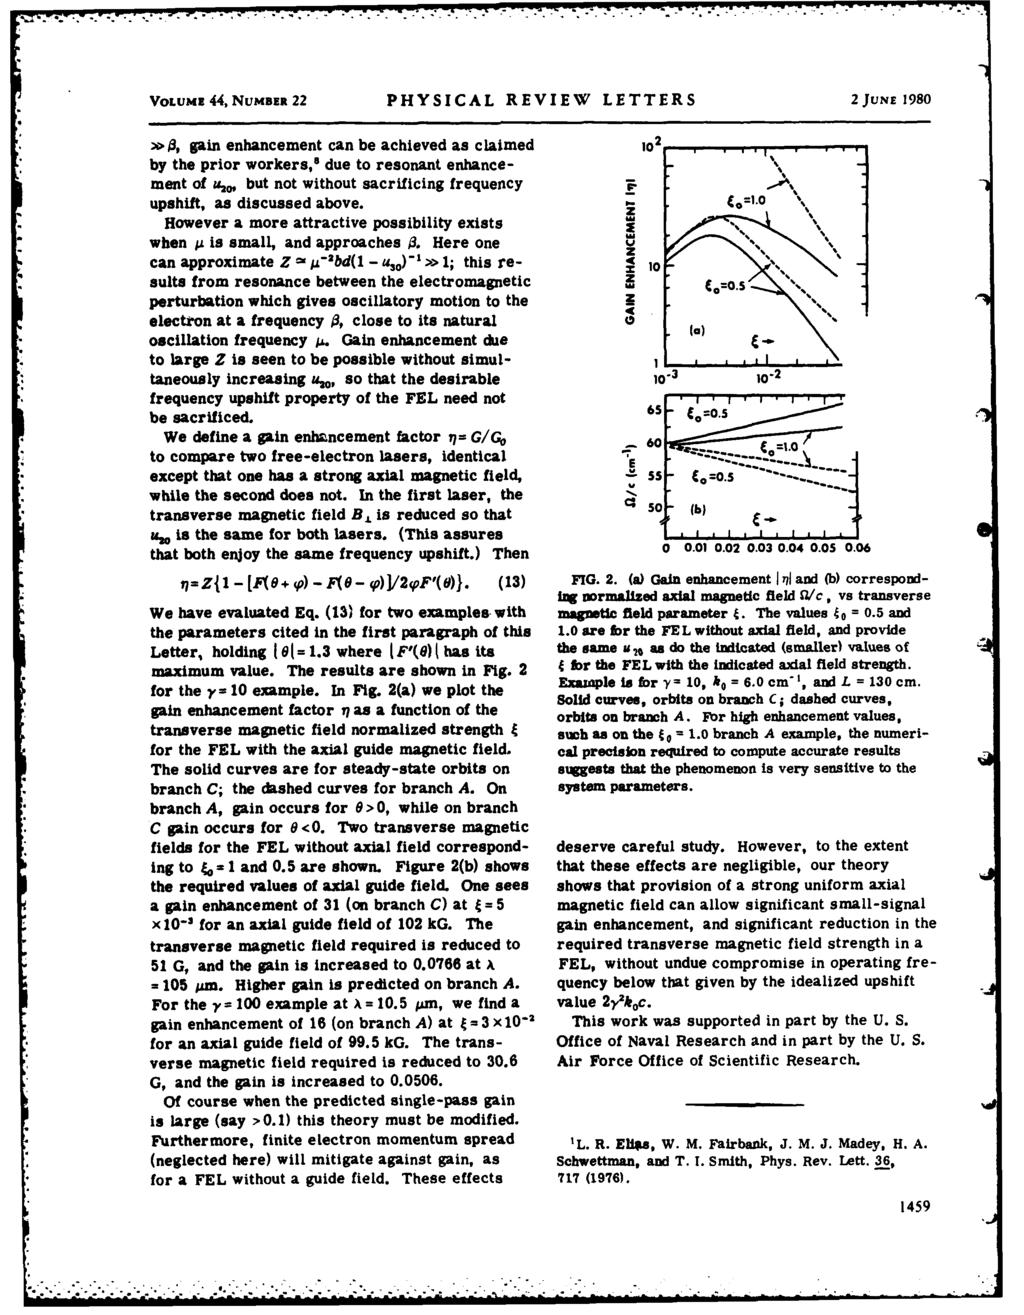 VOLUMs 44, NUMBER 22 PHYSICAL REVIEW LETTERS 2JuNE 1980 >> 0, gain enhancement can be achieved as claimed 10 2 by the prior workers," due to resonant enhancement of &h, but not without sacrificing